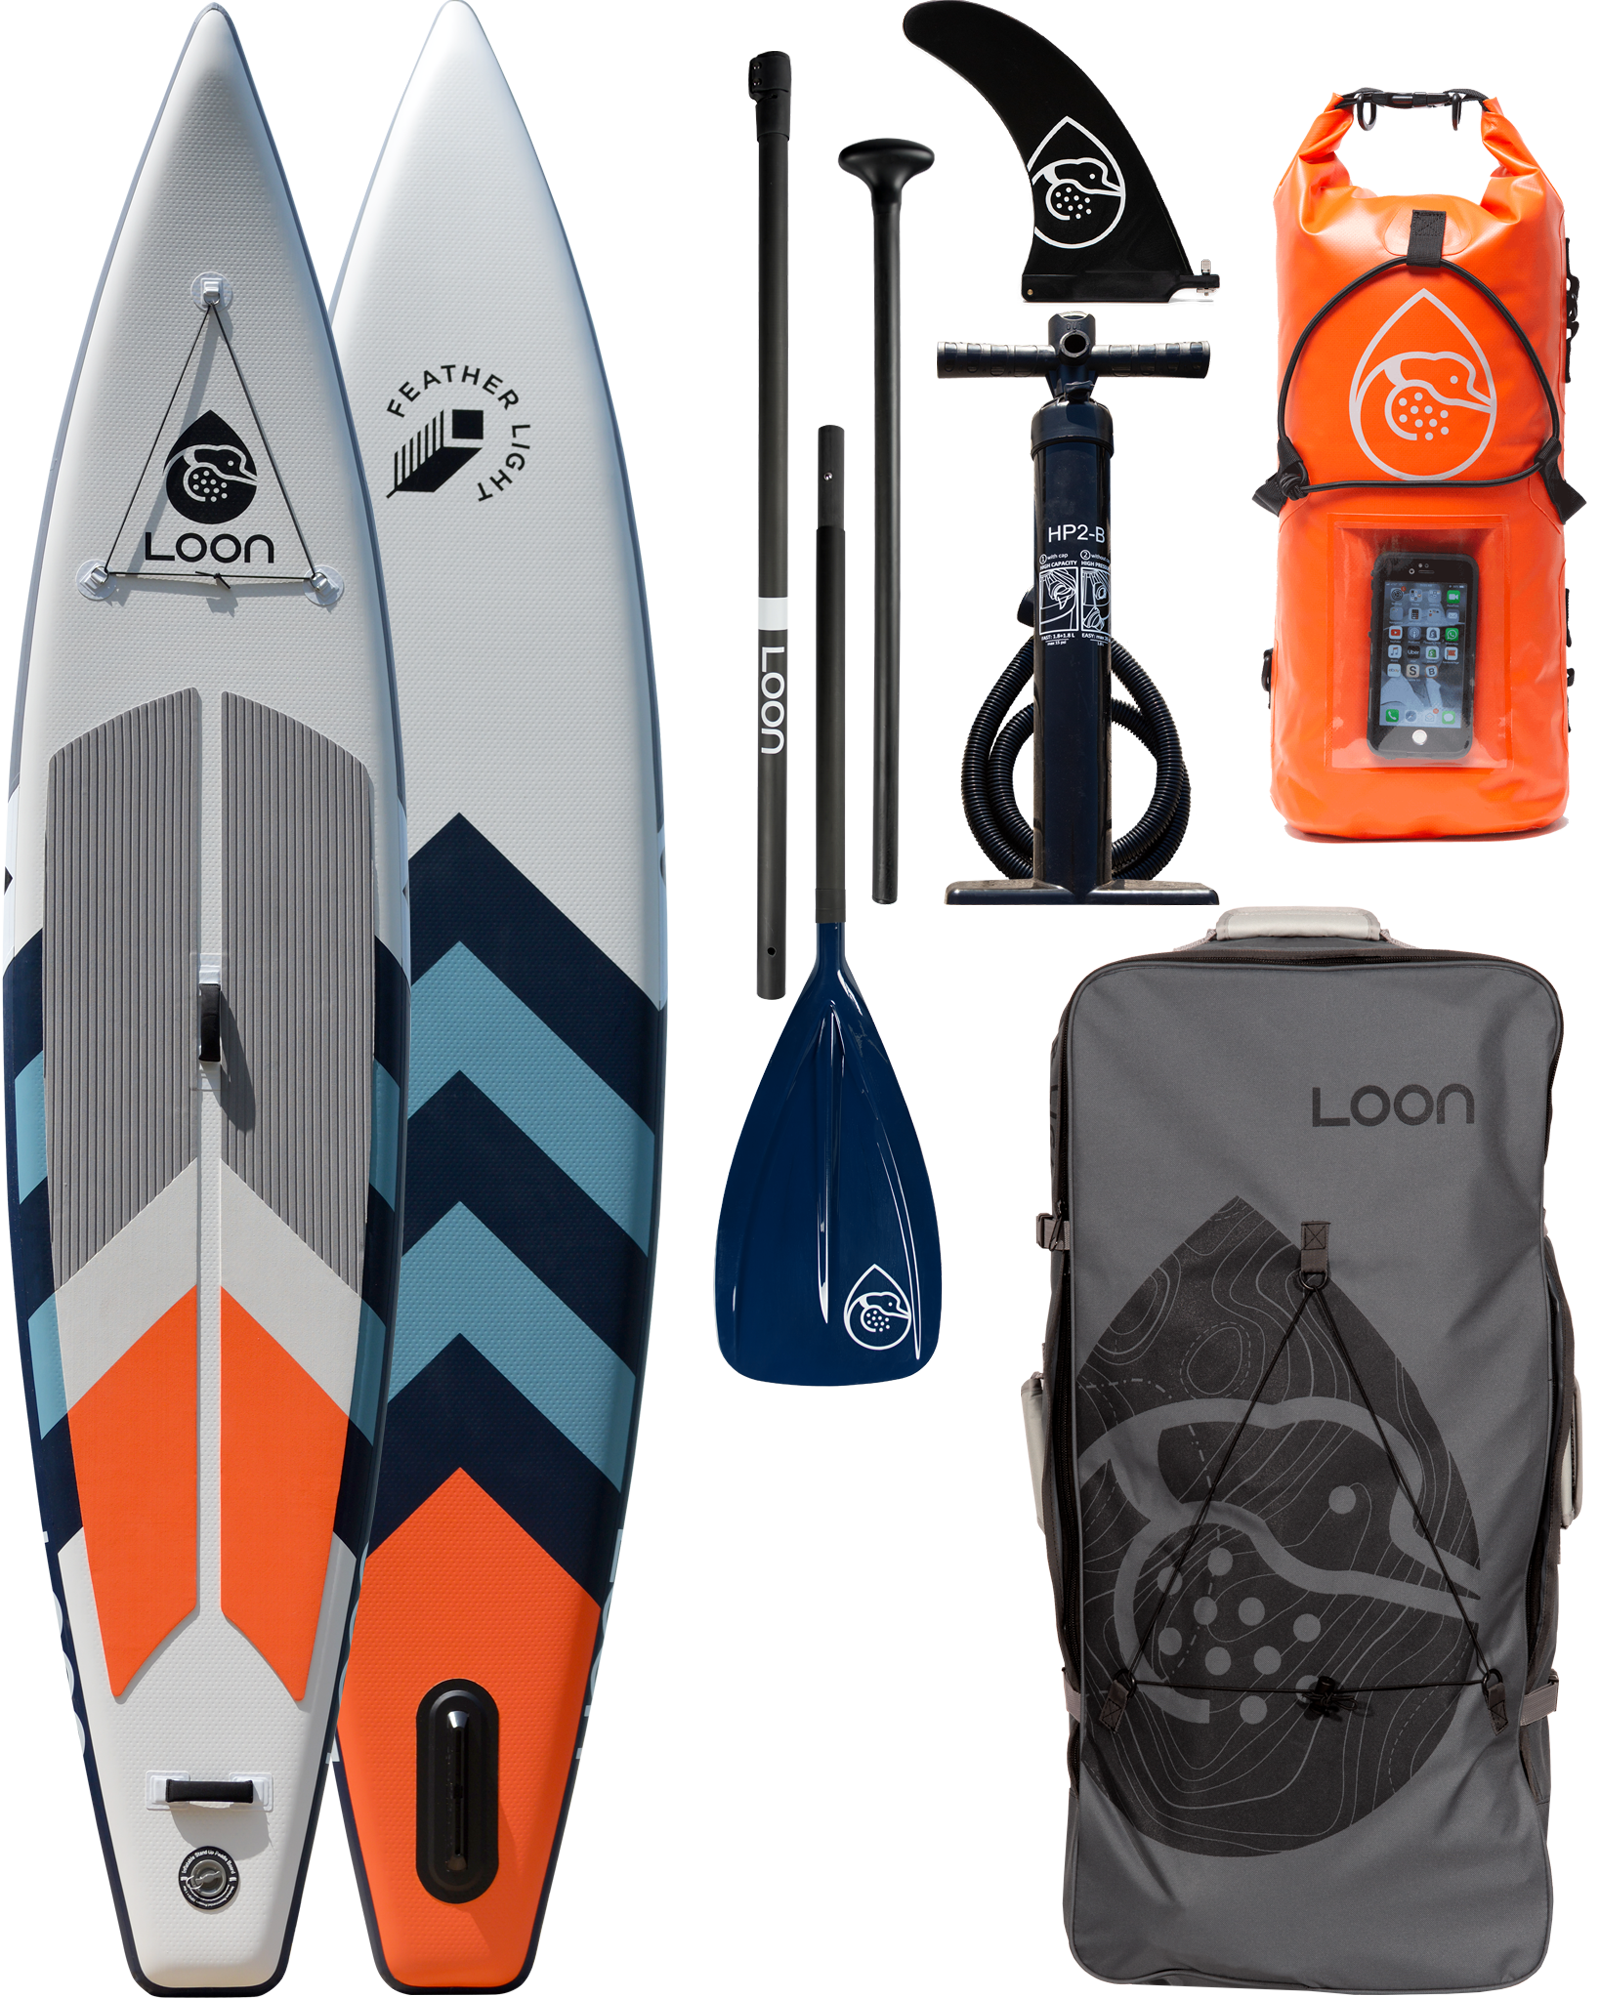 Complete SUP Package: Touring 12'6" Inflatable Paddle Board + Paddle